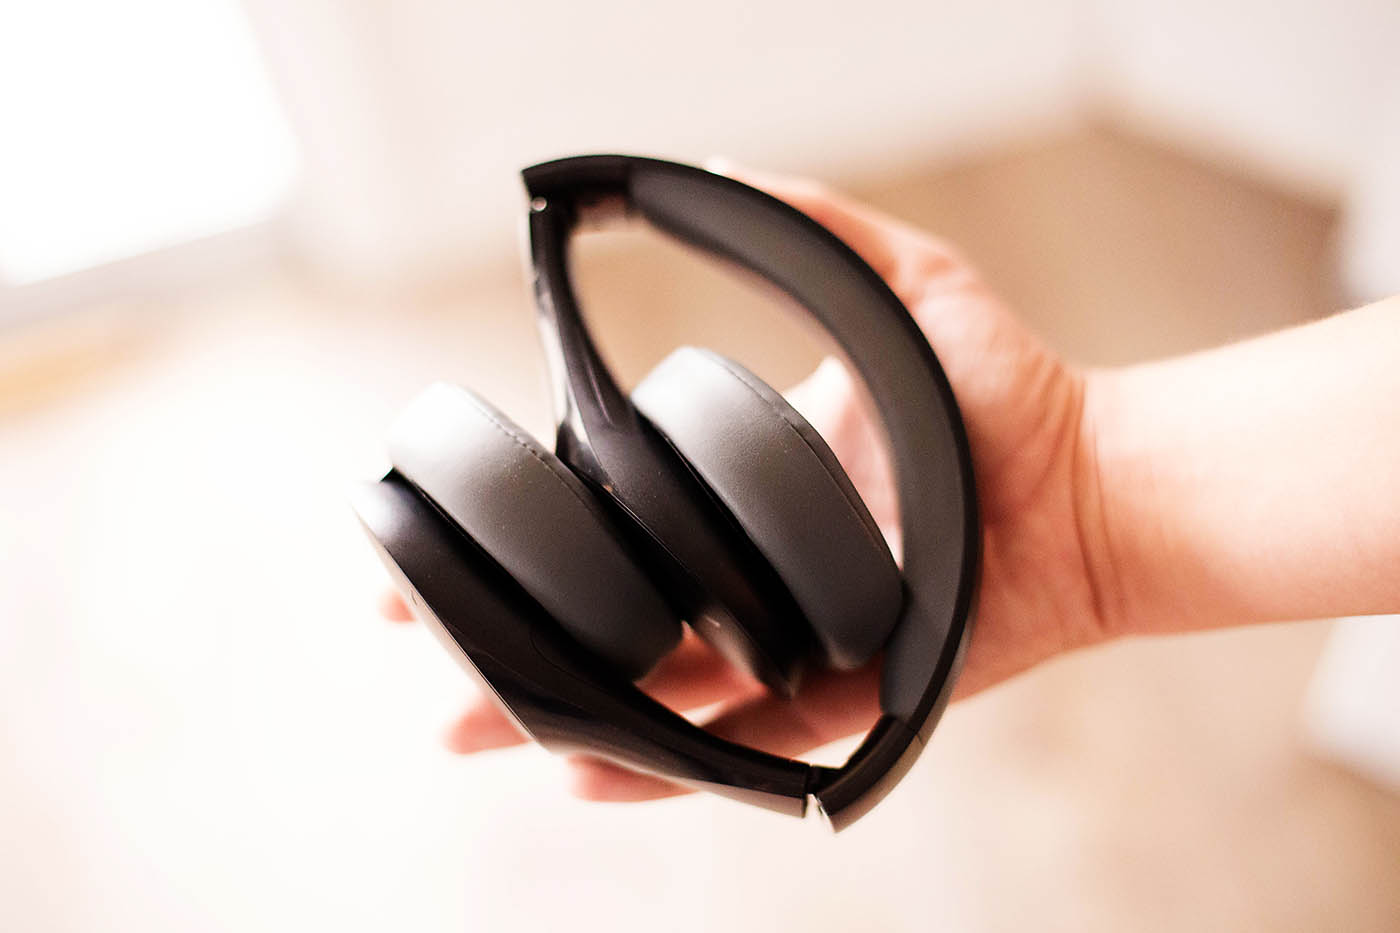 Gift idea: Motorola Pulse Escape Headphones - an inexpensive gift for anyone on your list